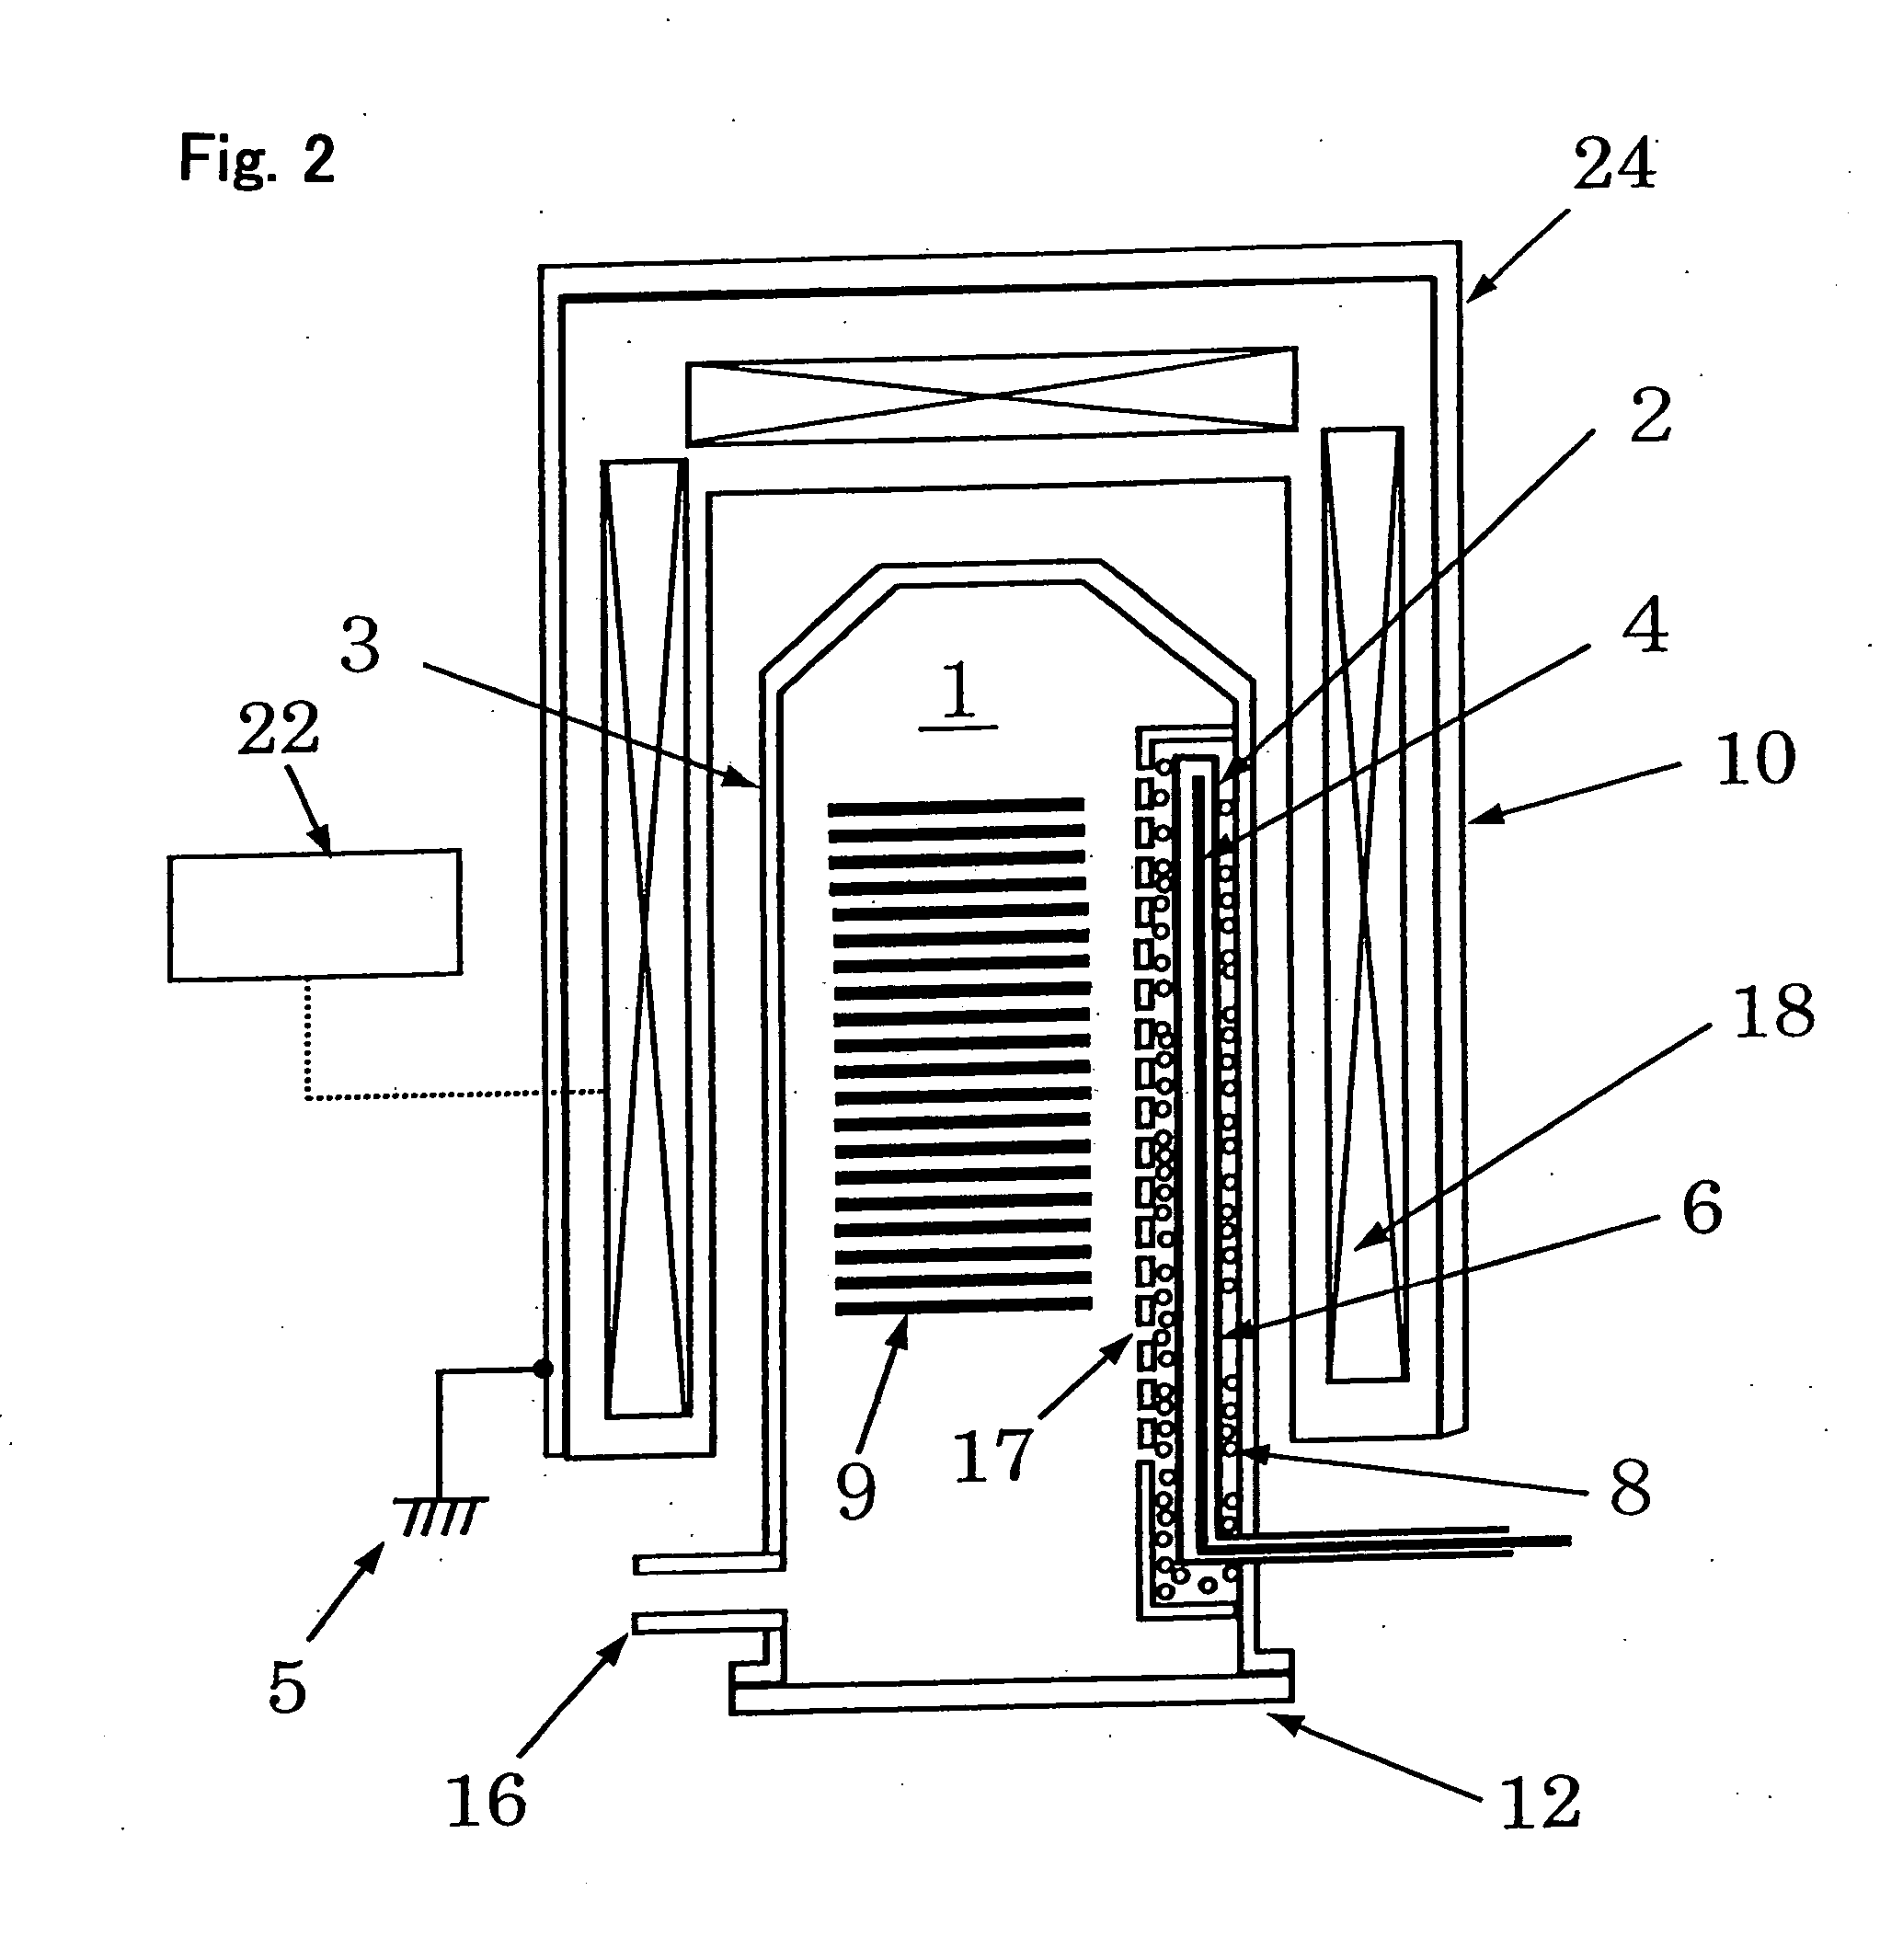 Substrate processing and method of manufacturing device